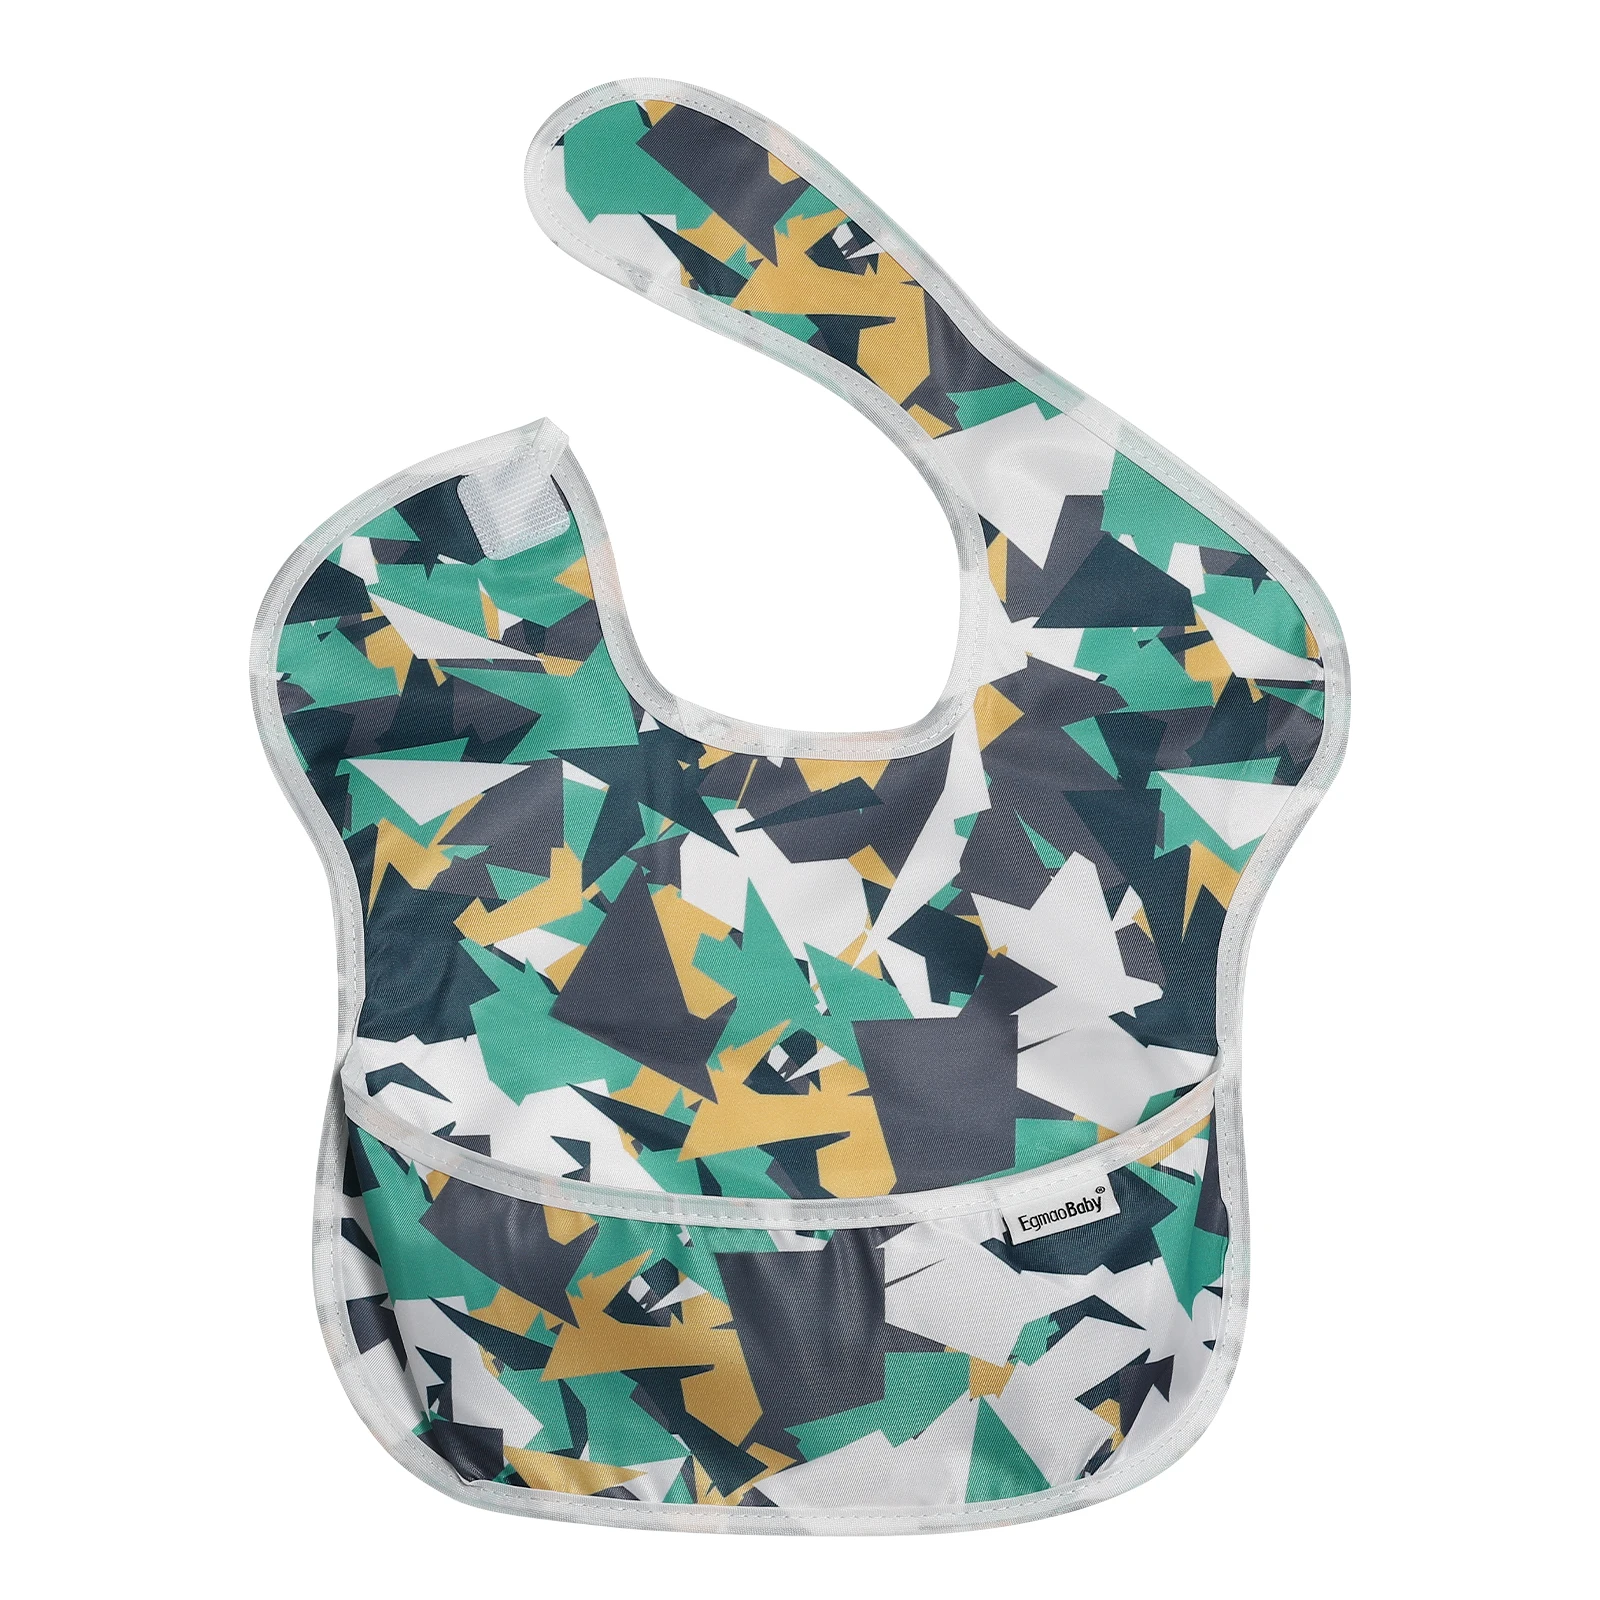 baby accessories carry bag	 Waterproof Baby Bibs 100% Polyester TPU Coating Feeding Bibs Washable Baby Bibs with Food Catcher for Baby Girls & Boys child safety seat Baby Accessories